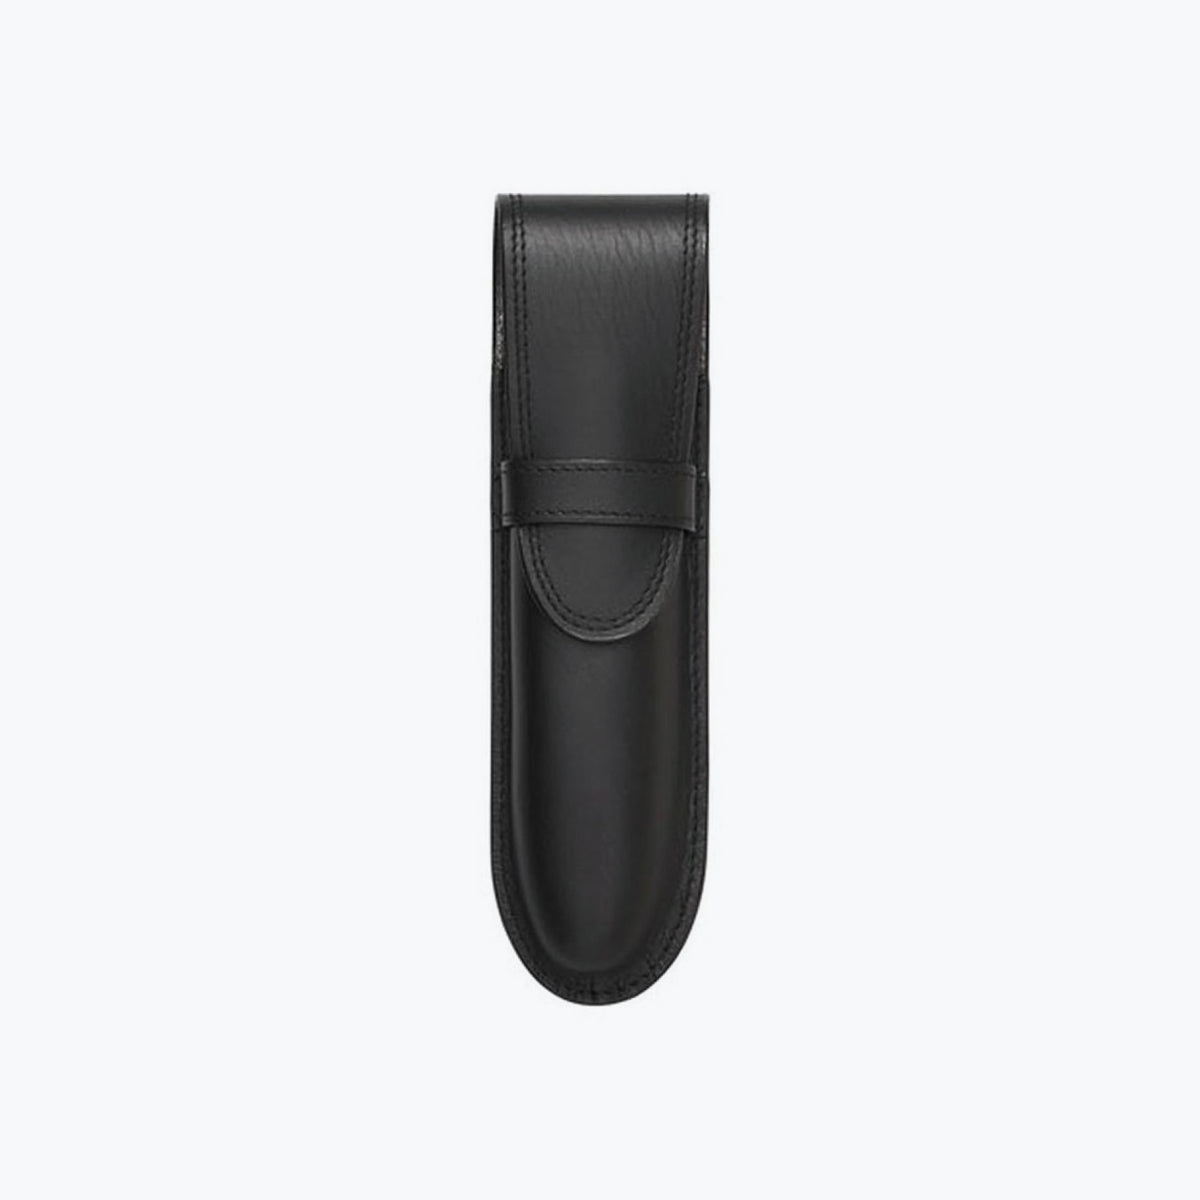 Pilot - Pen Pouch - Trender Leather - For Two - Black <Outgoing>